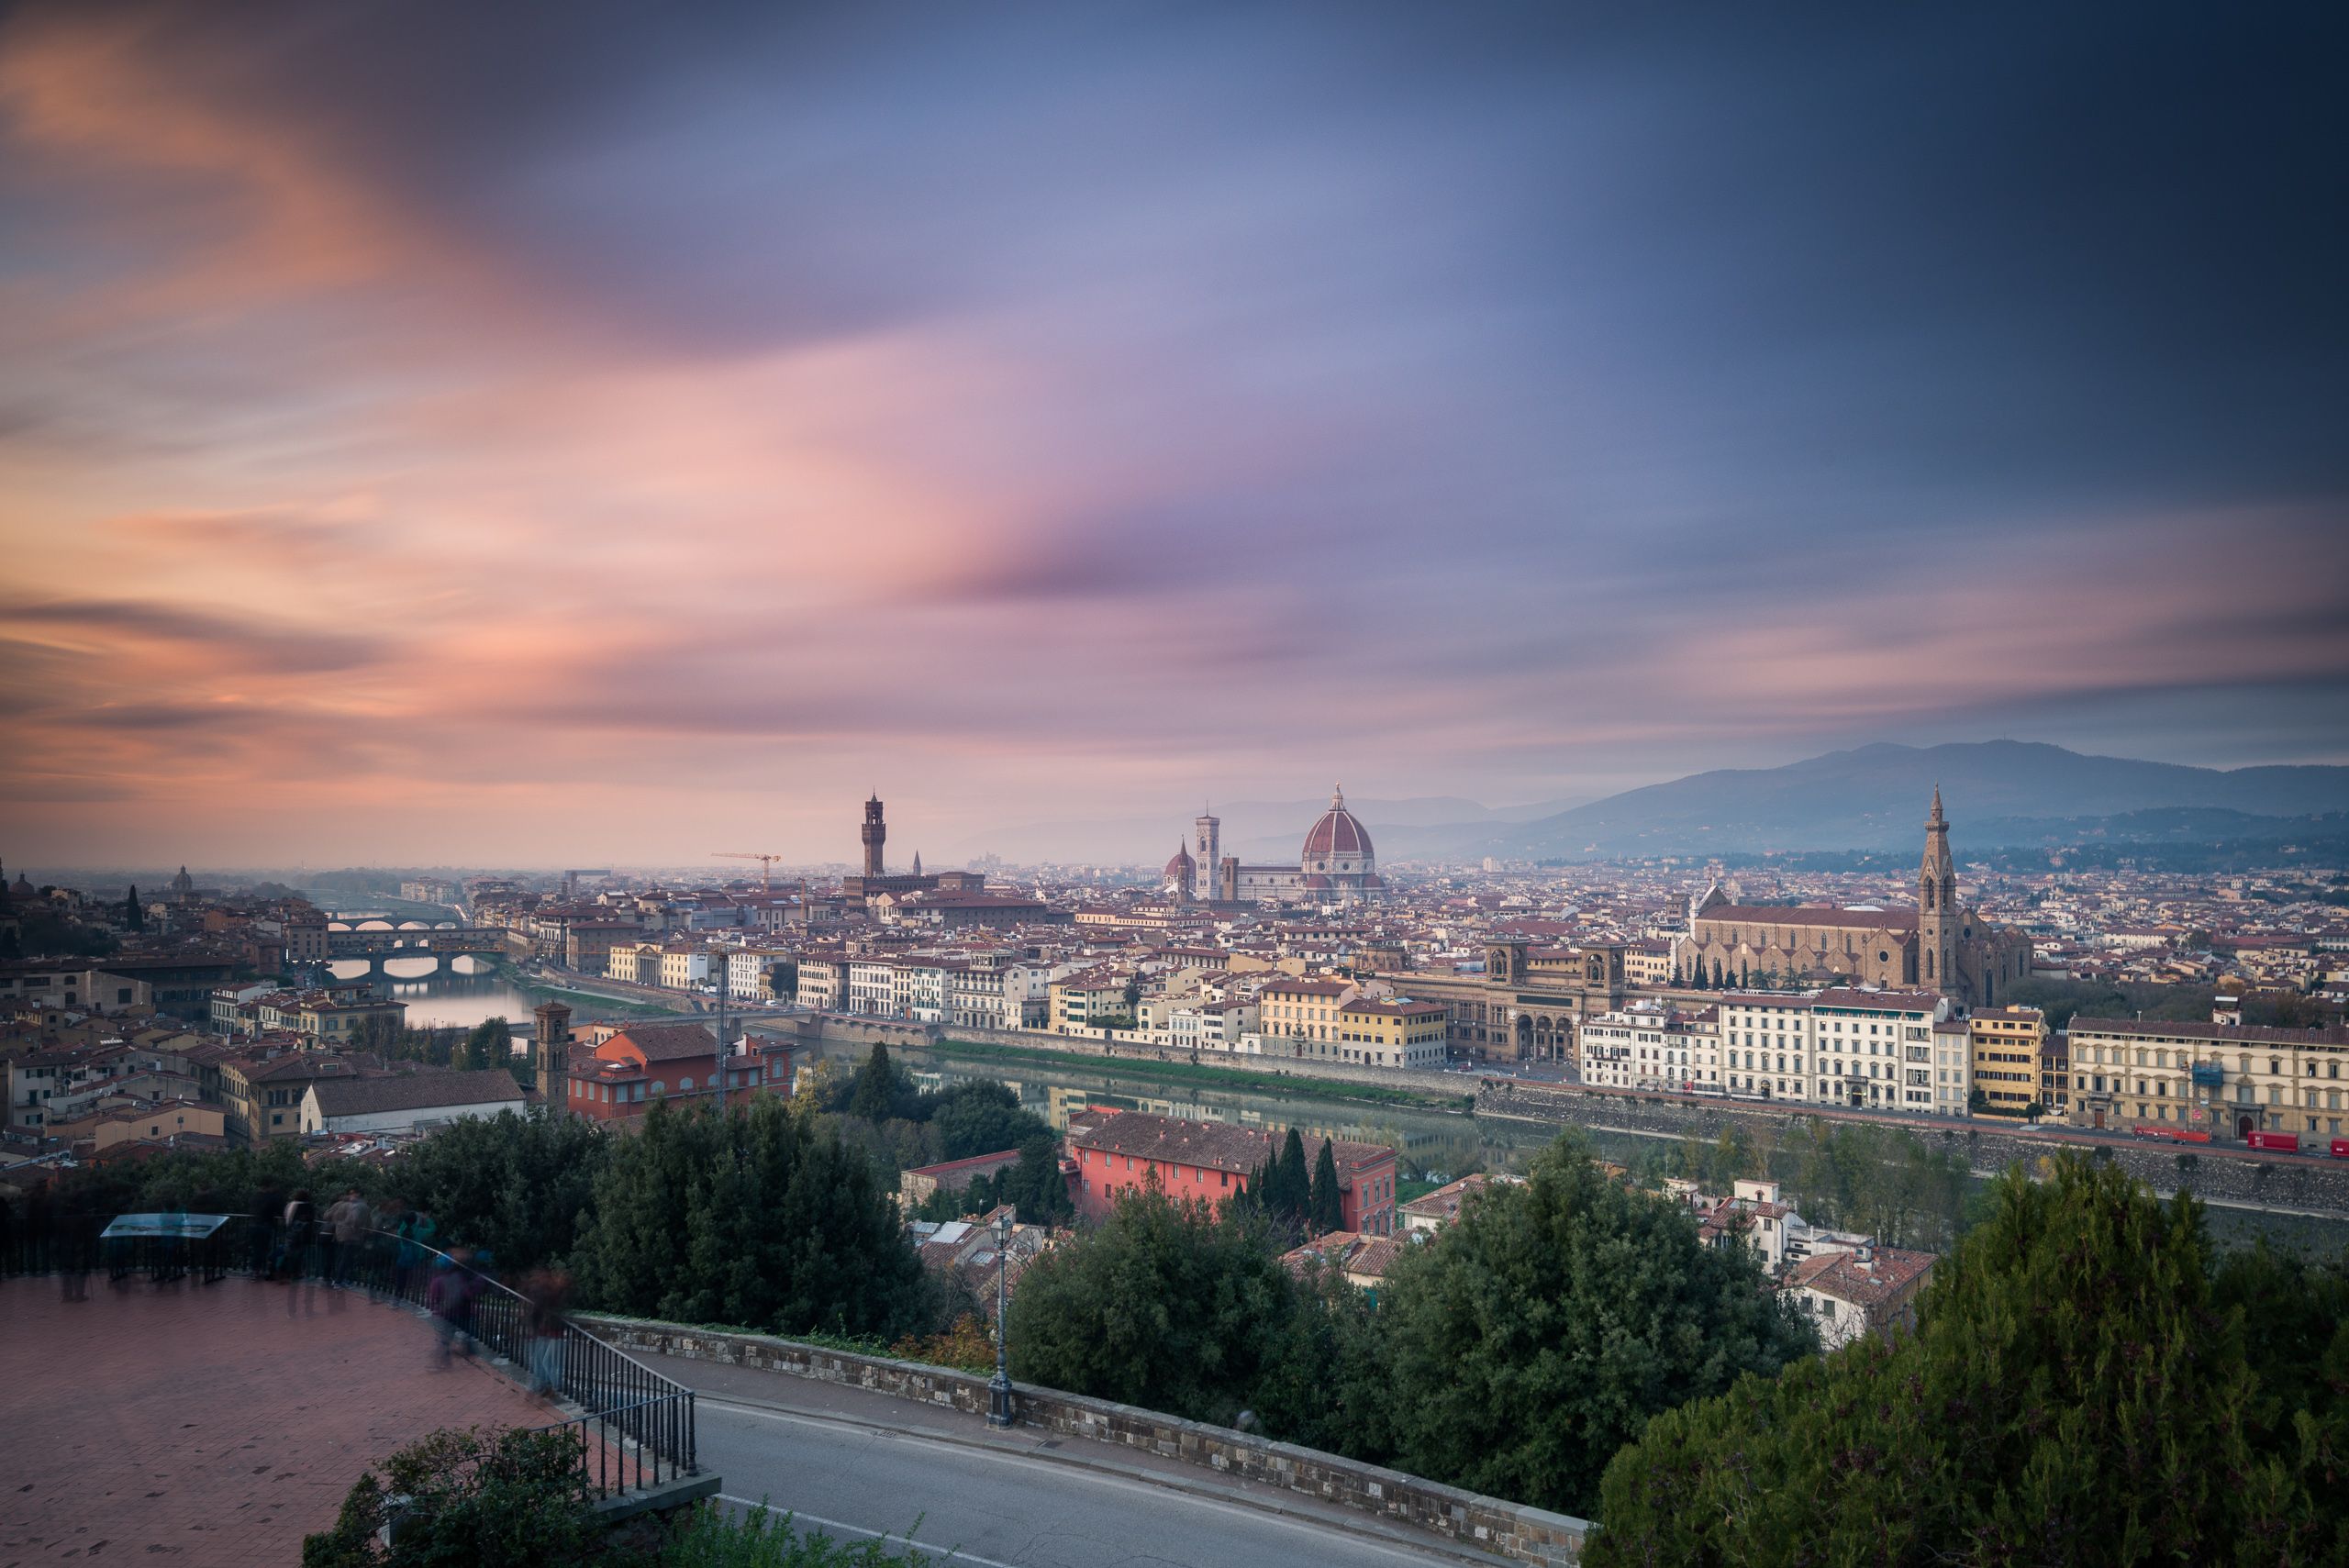 tuscany, man made, florence, italy, cities